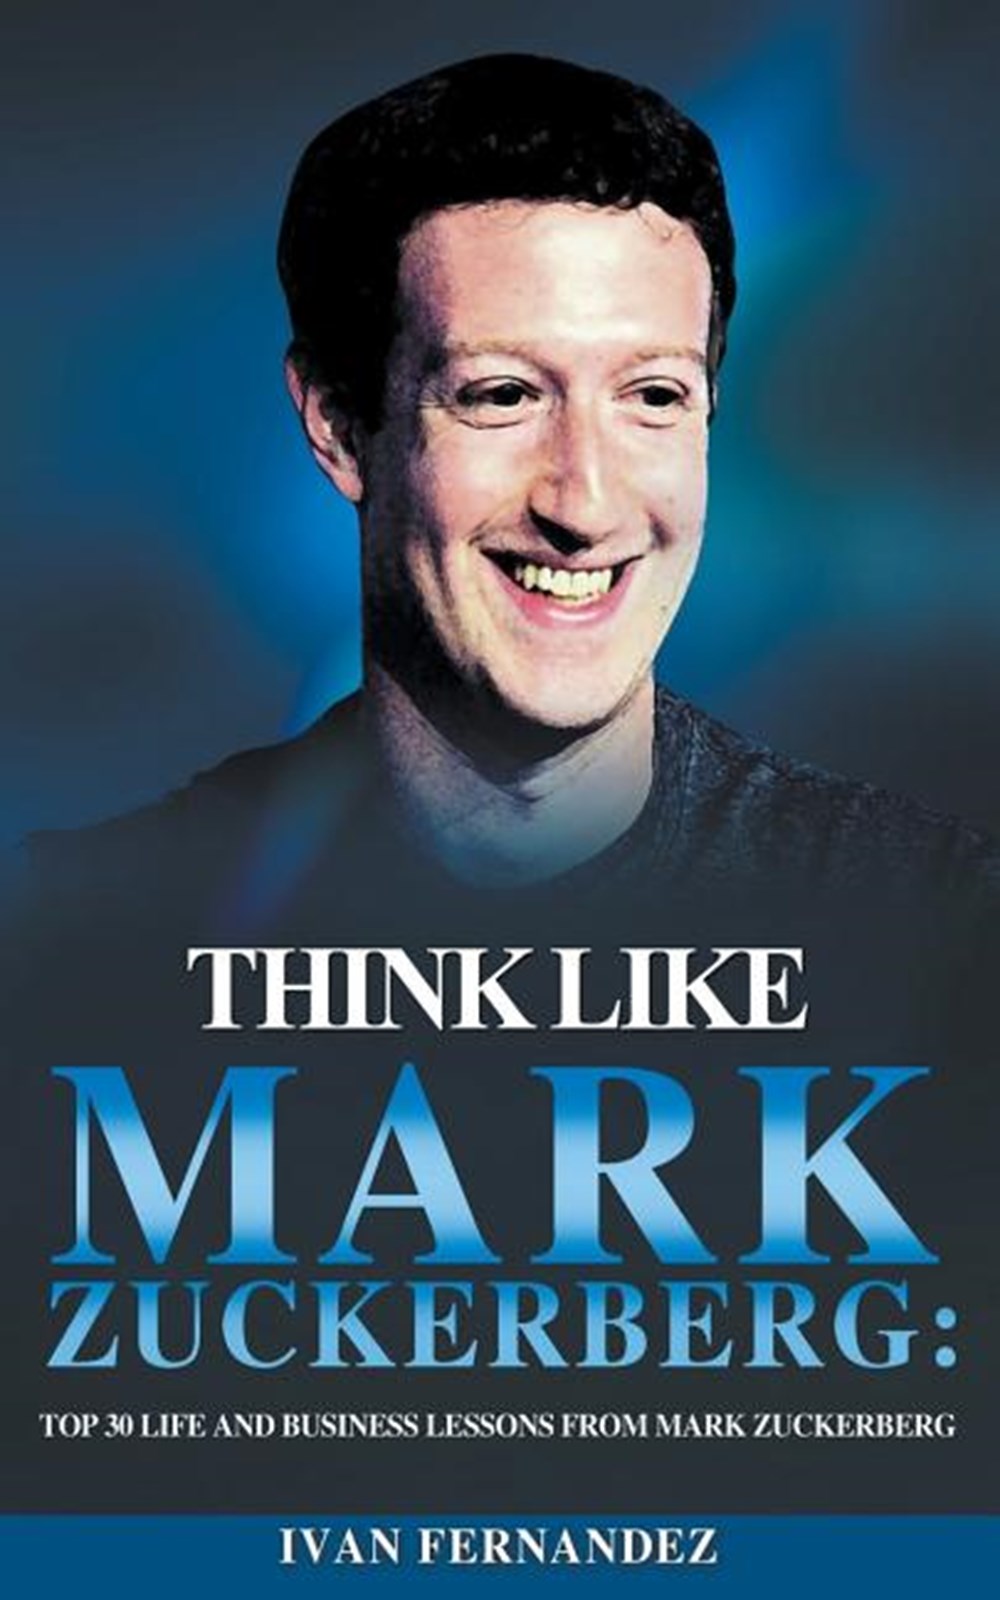 Think Like Mark Zuckerberg Top 30 Life and Business Lessons from Mark Zuckerberg